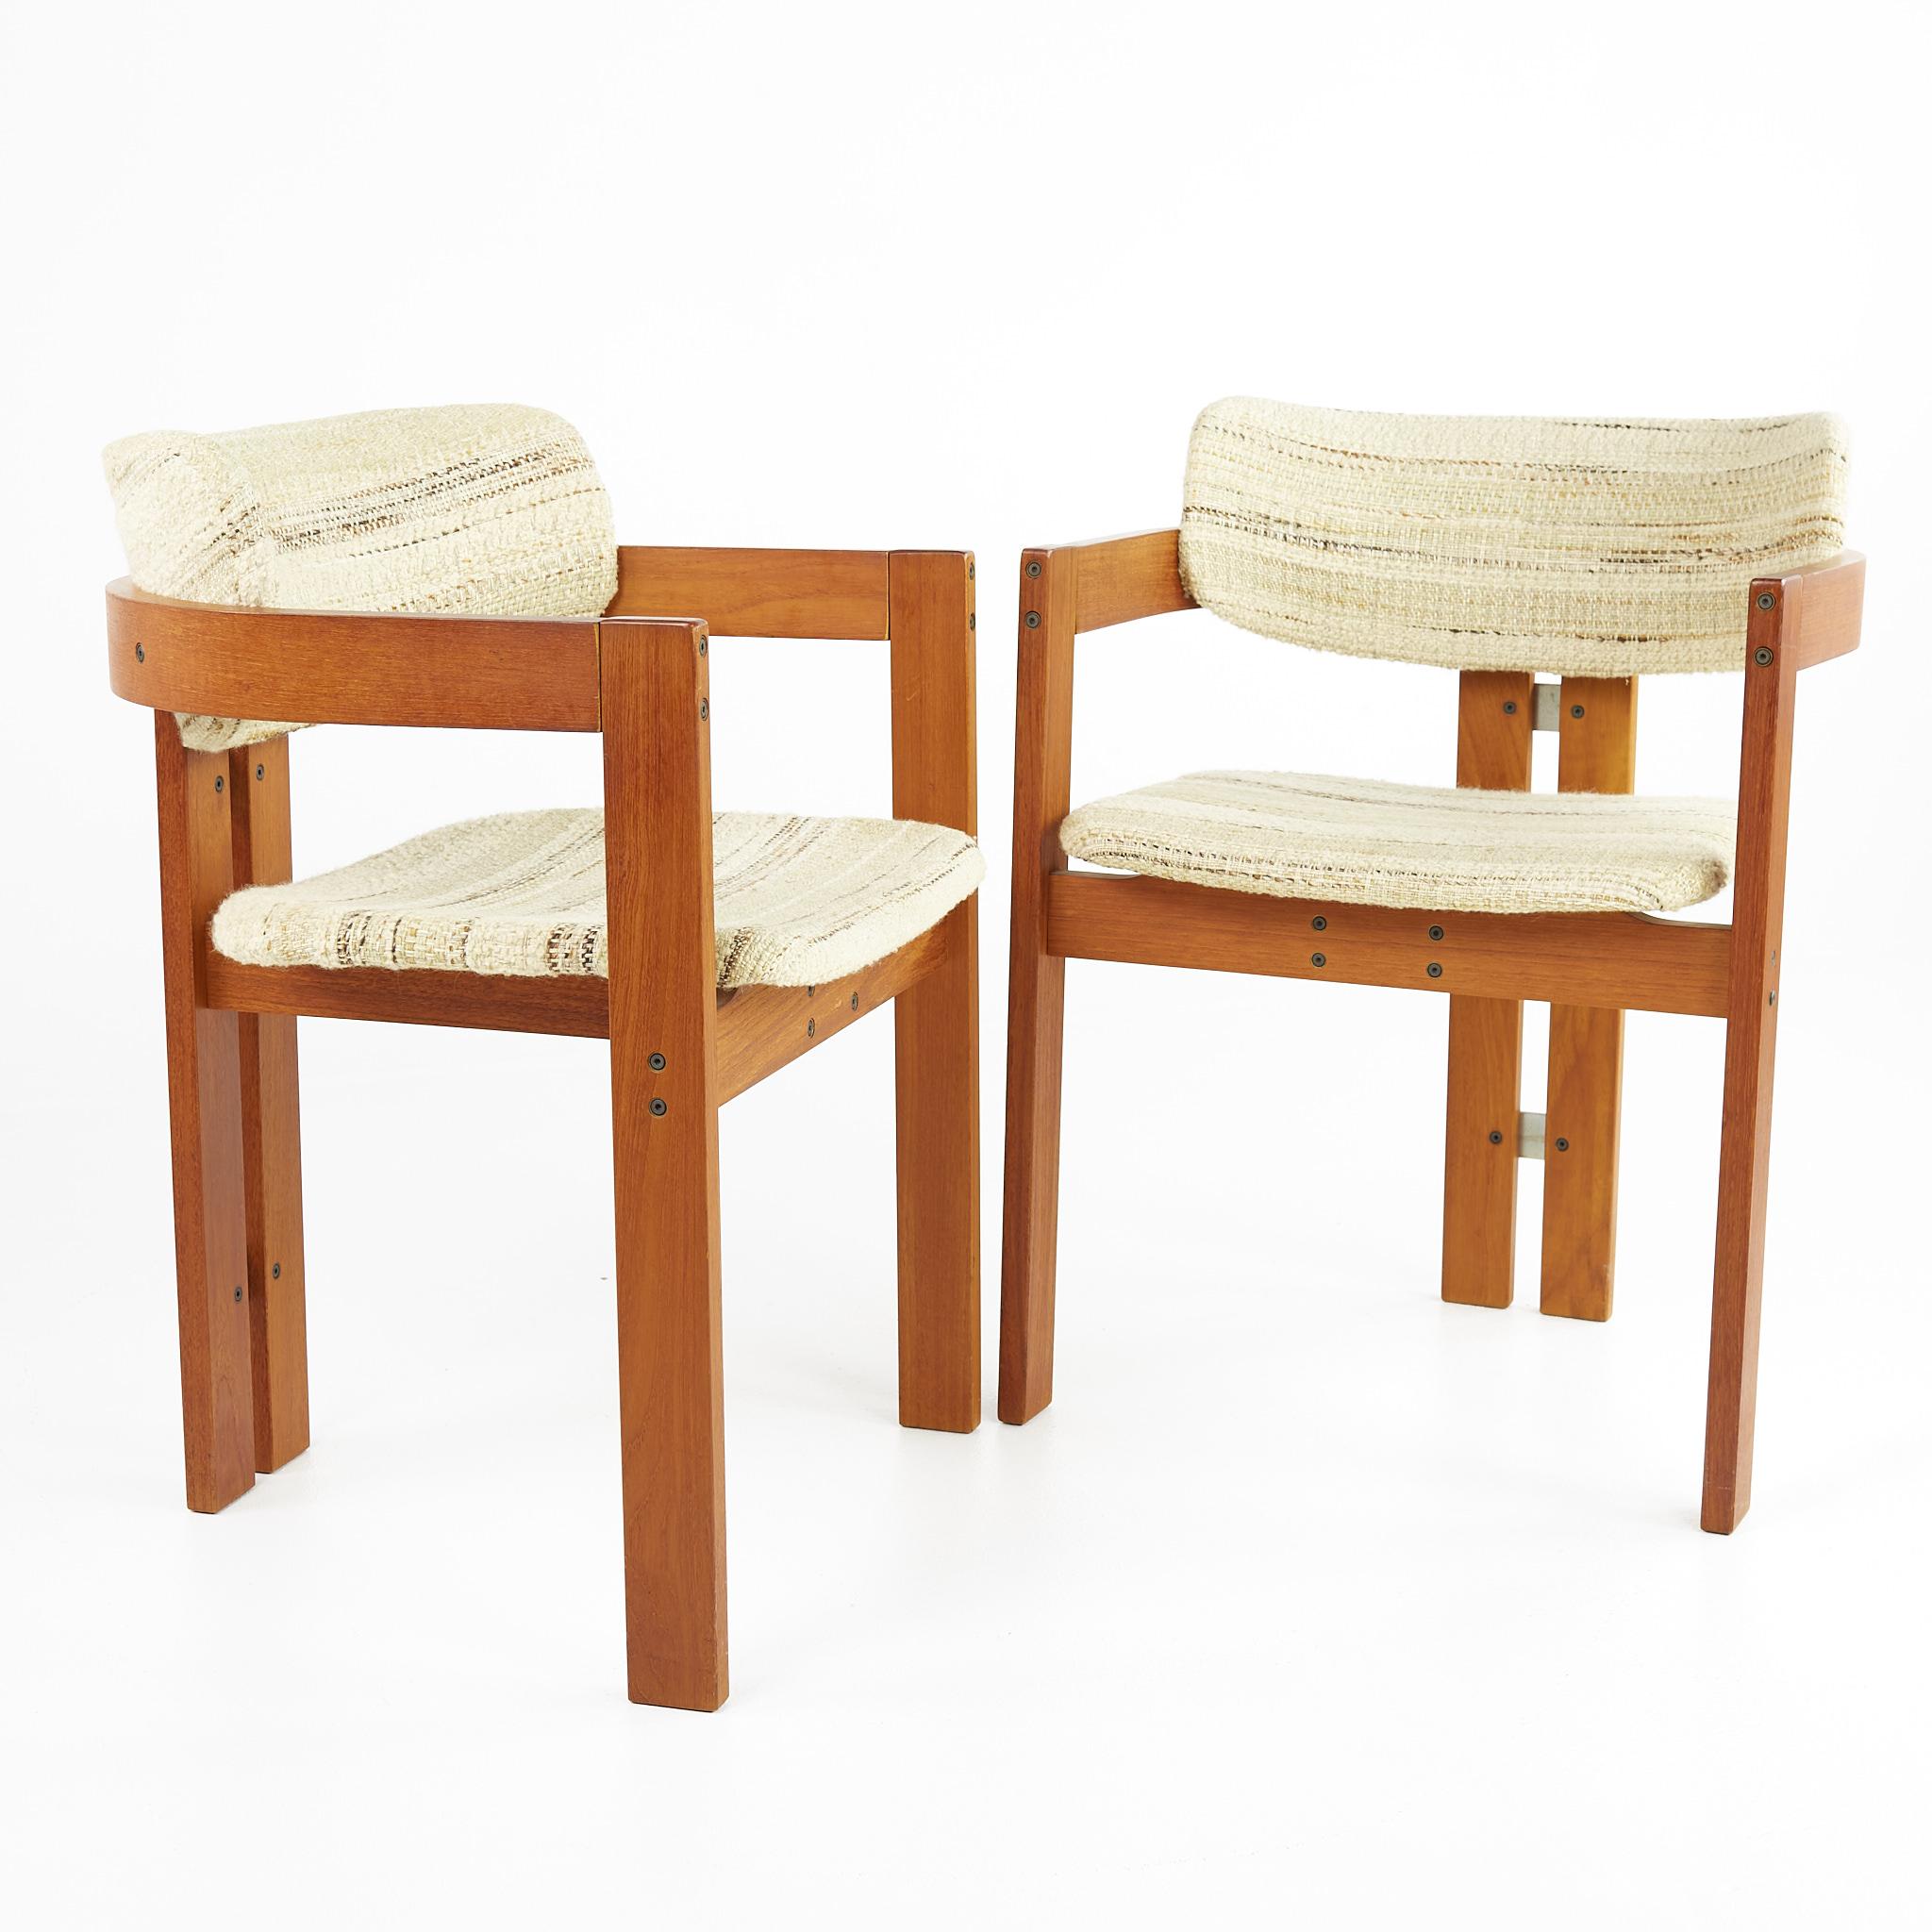 Late 20th Century Afra and Tobia Scarpa Style Mid Century Teak Dining Chairs, Set of 4